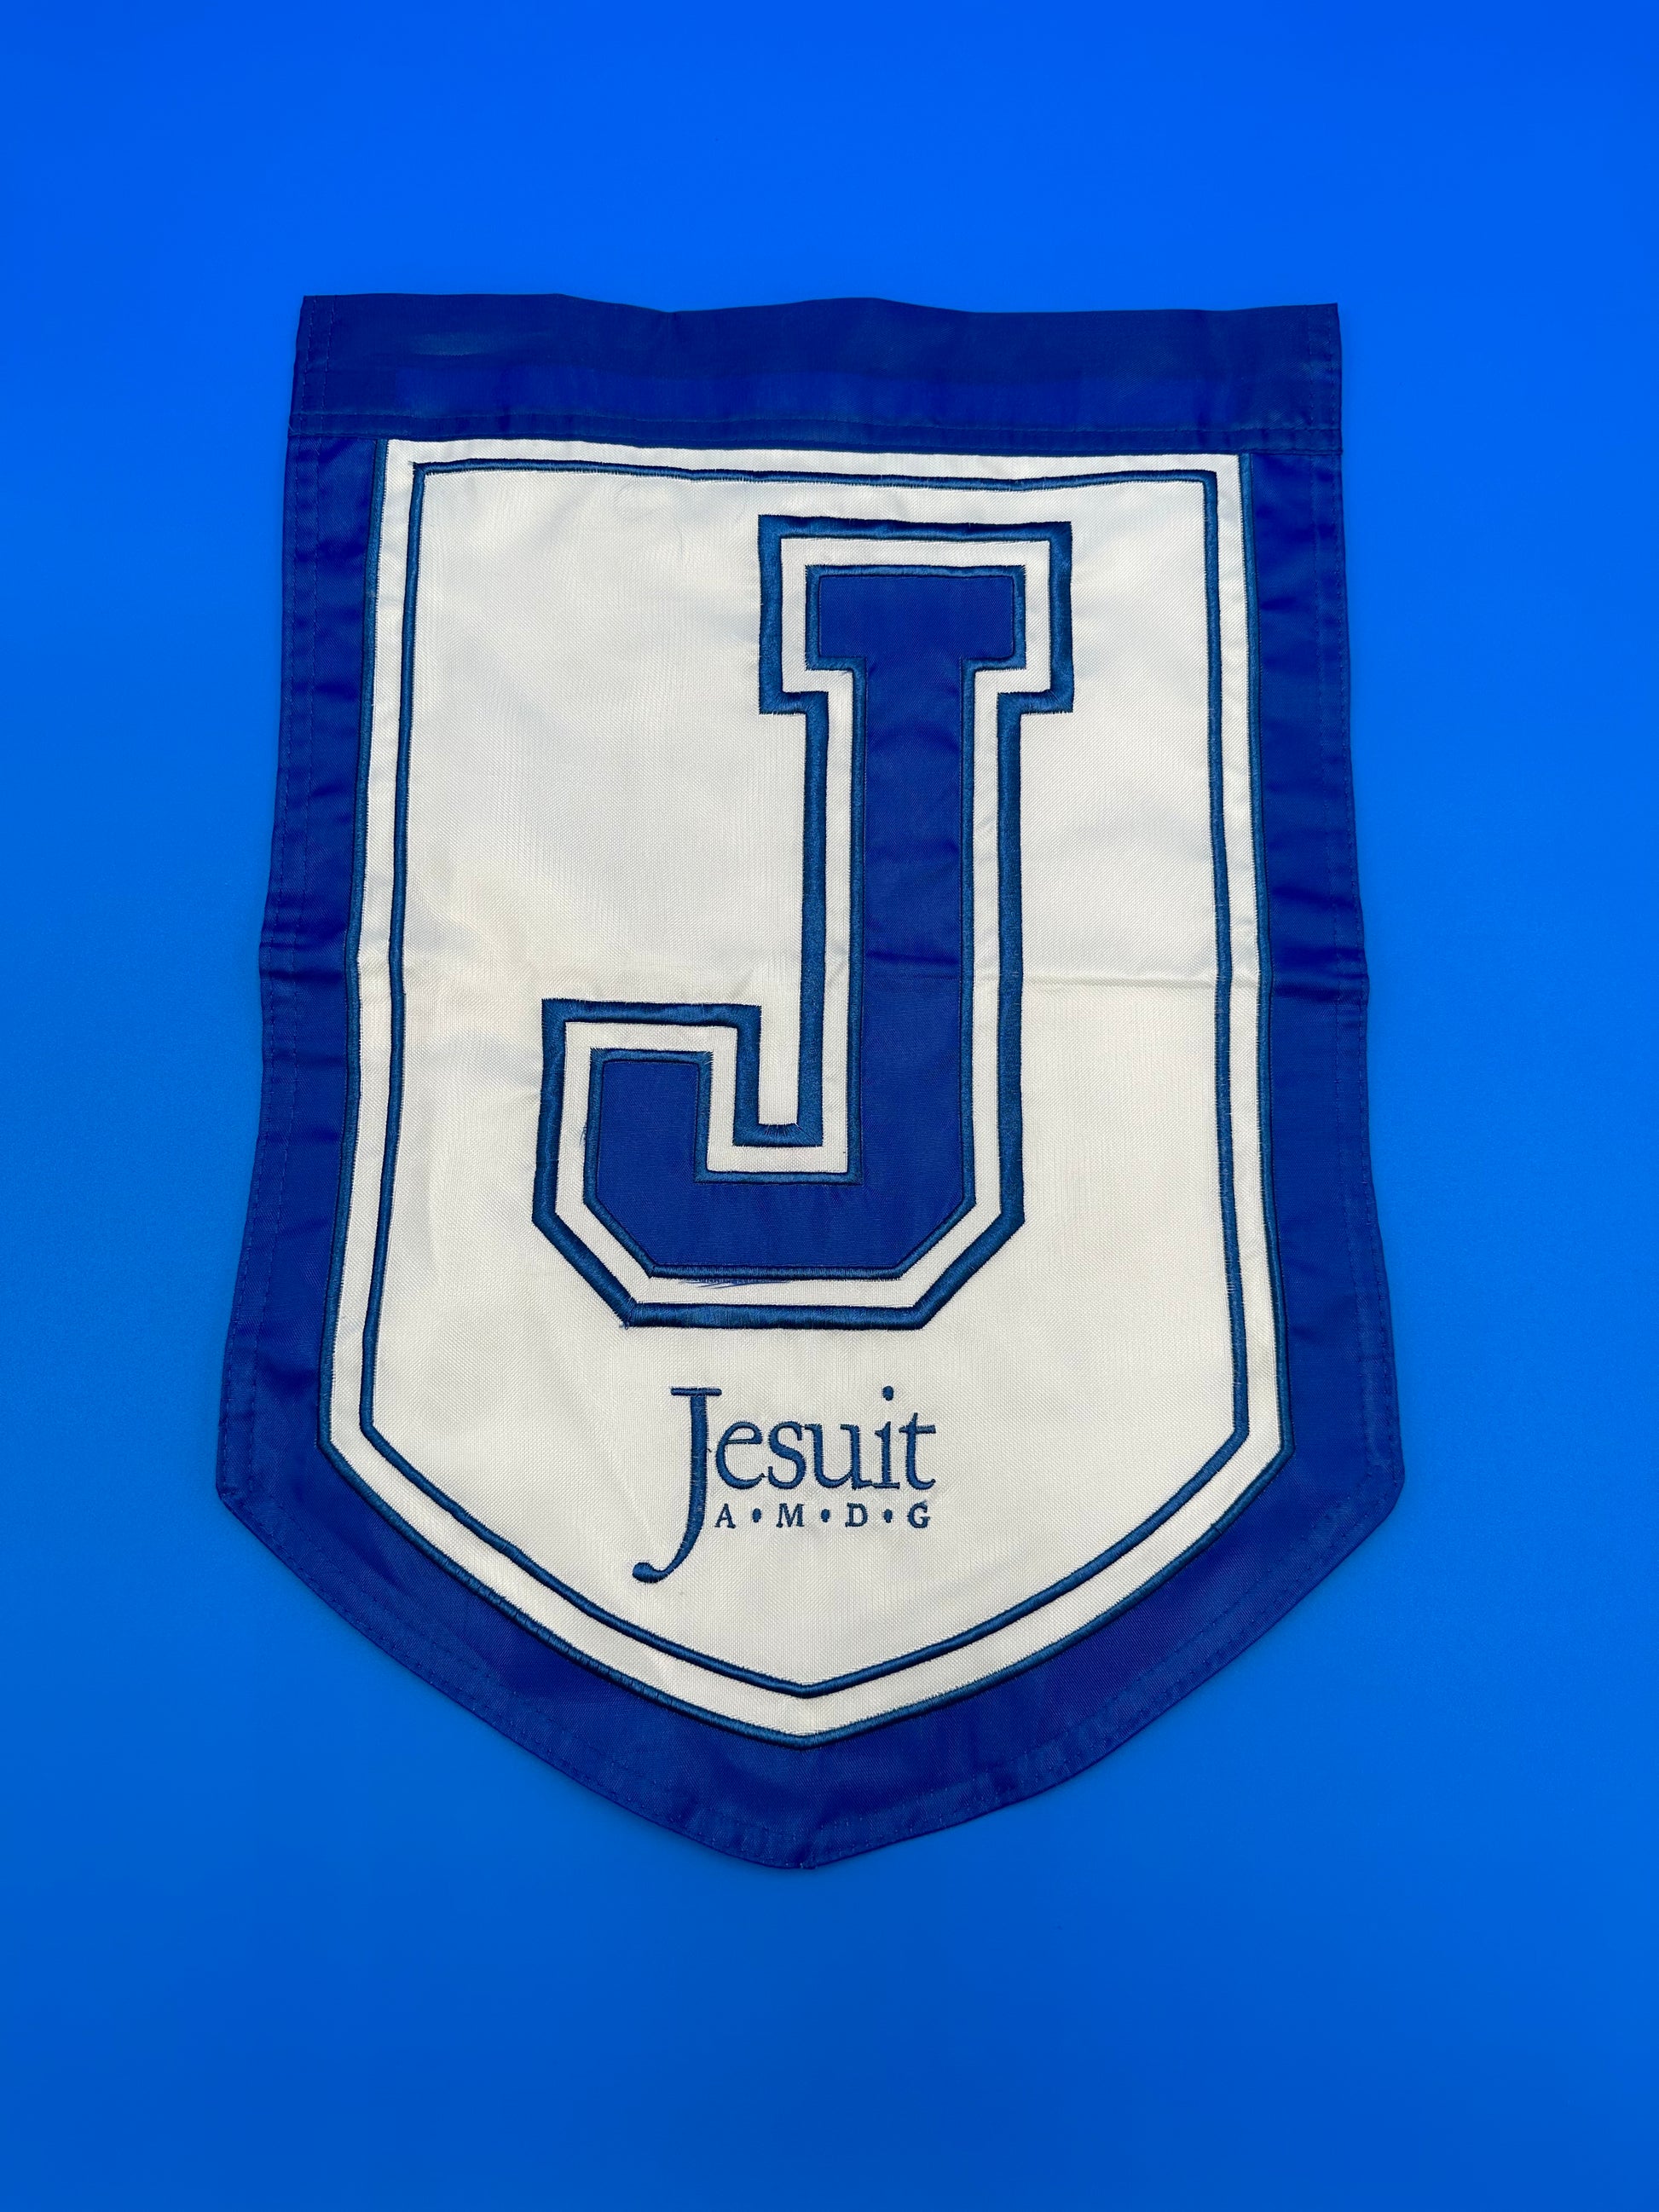 NOLA Flags.  100% Nylon.   2-sided - J and Jesuit logo. Measures 18 inch by 12 inches.